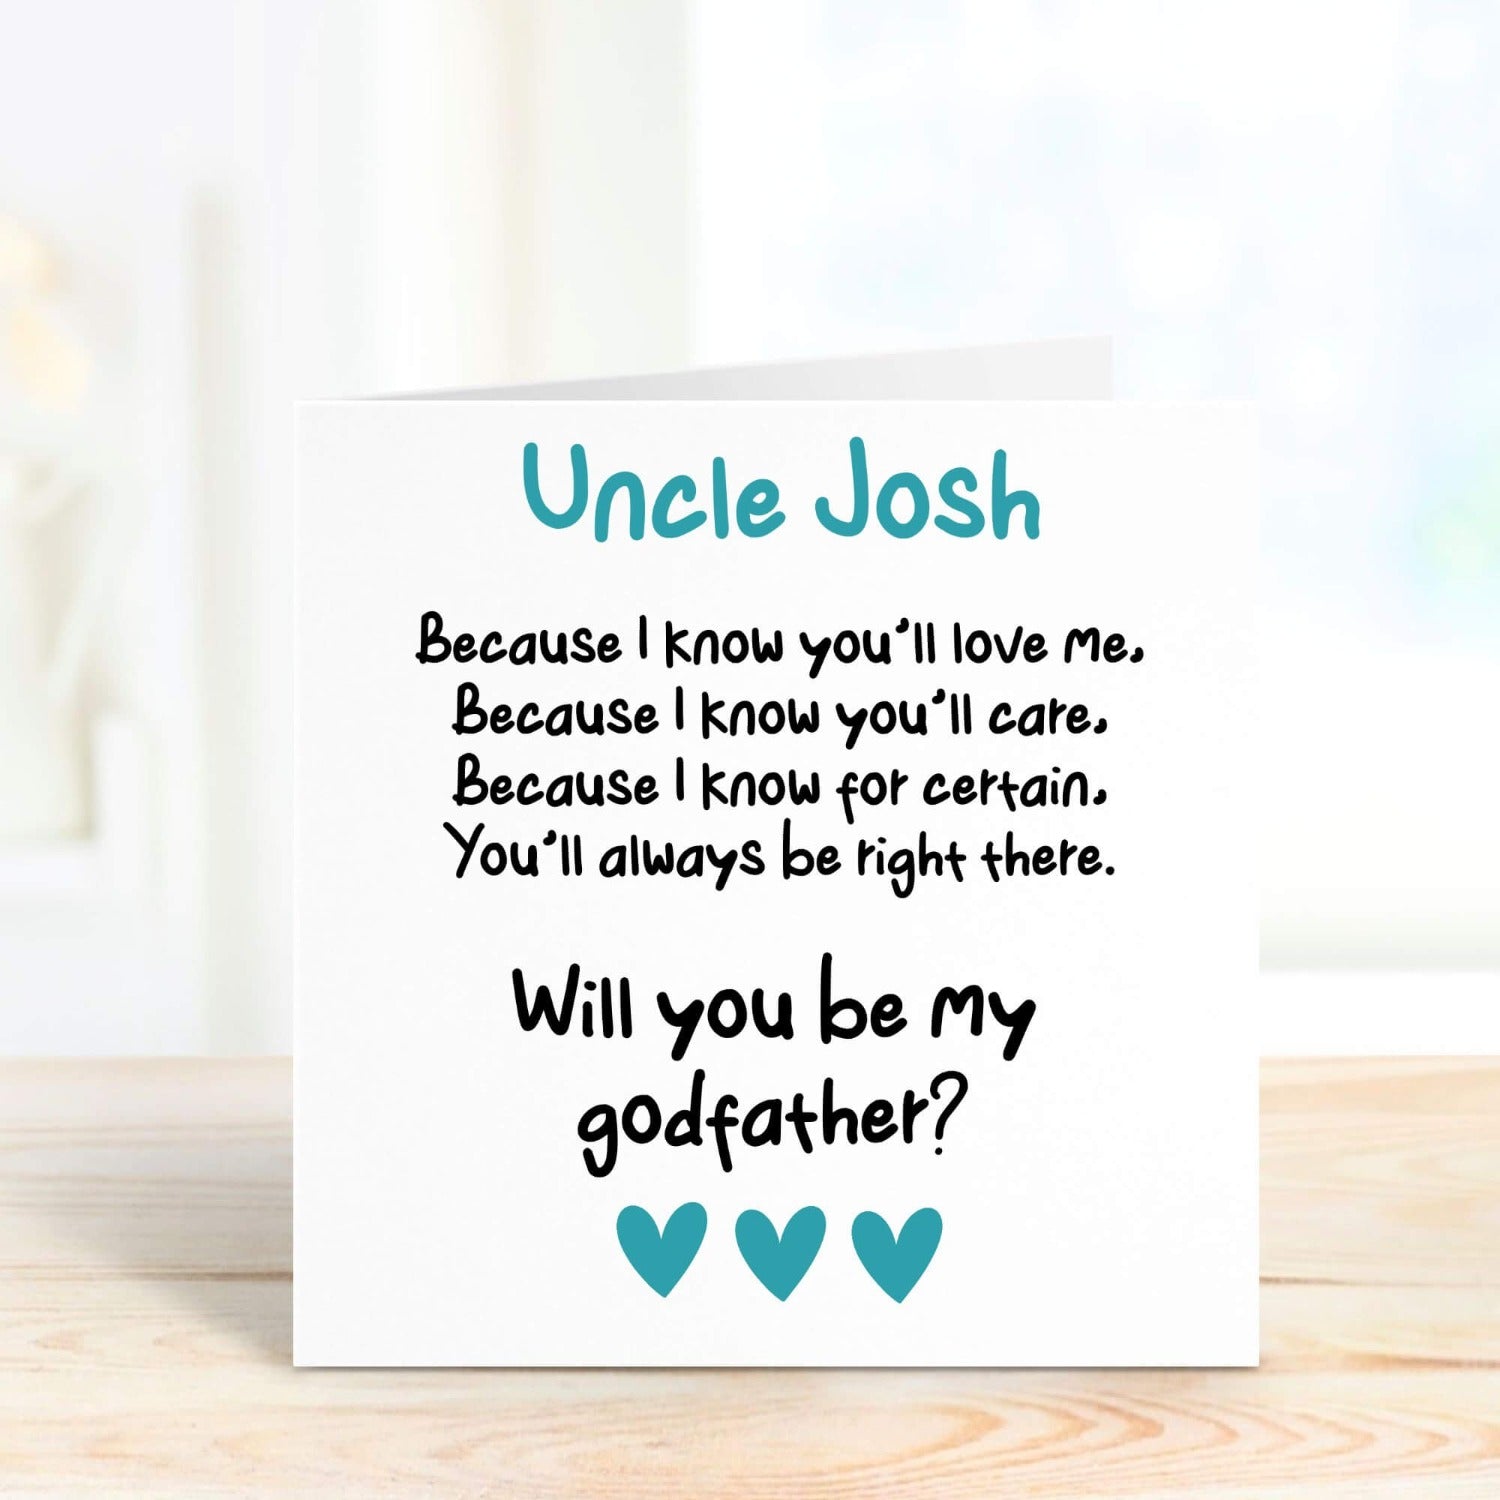 godfather proposal personalised card